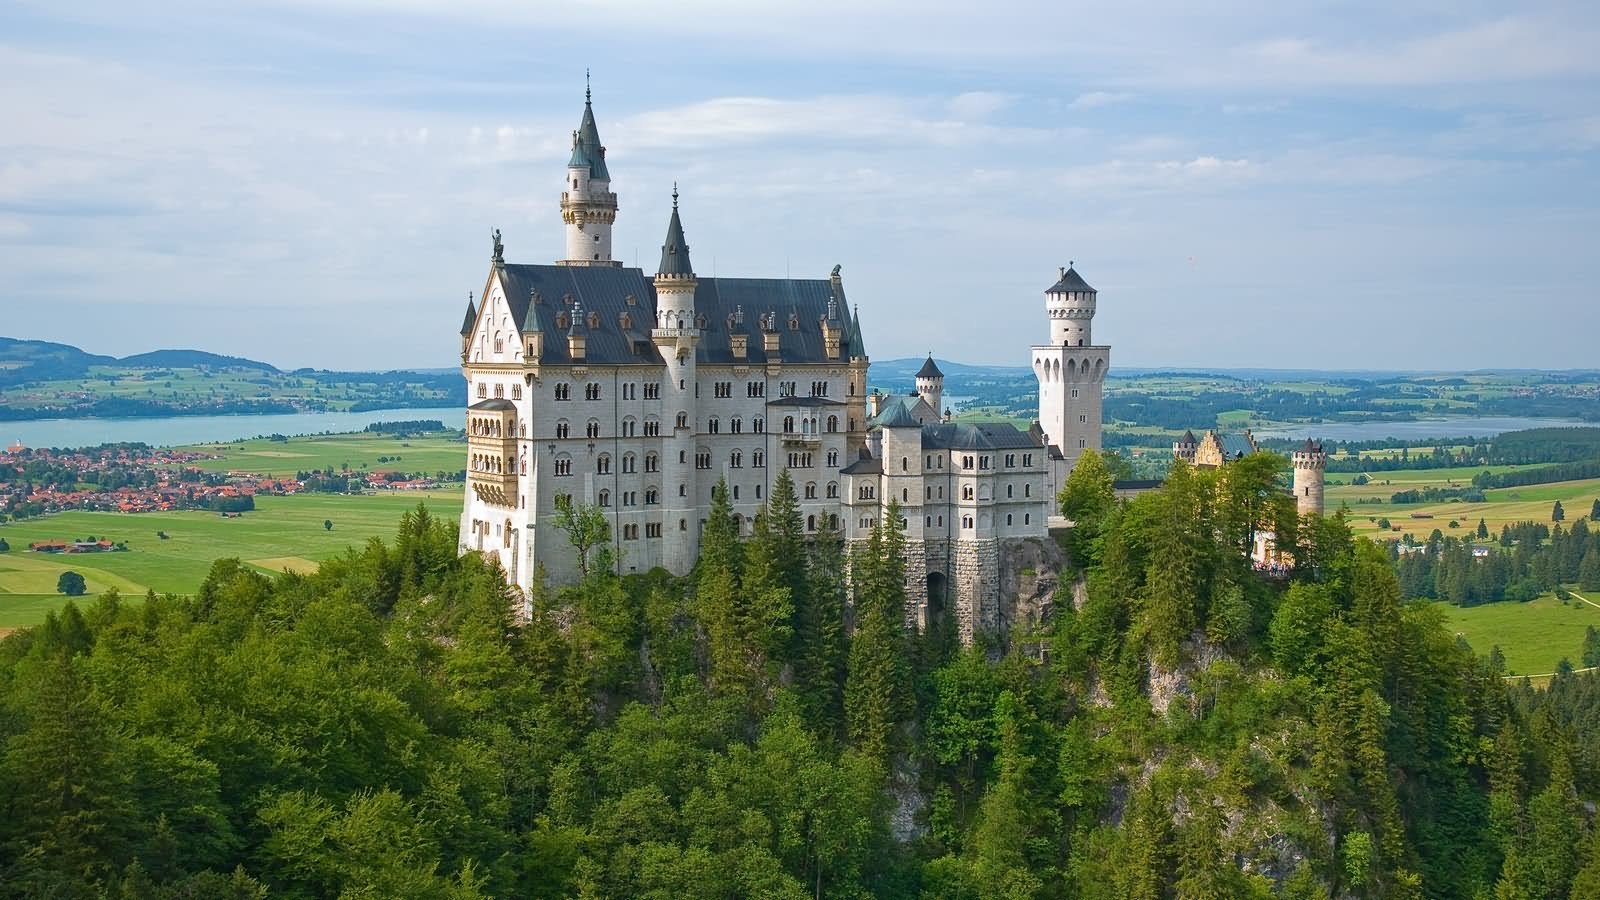 The Neuschwanstein Castle Surrounded With Green Trees